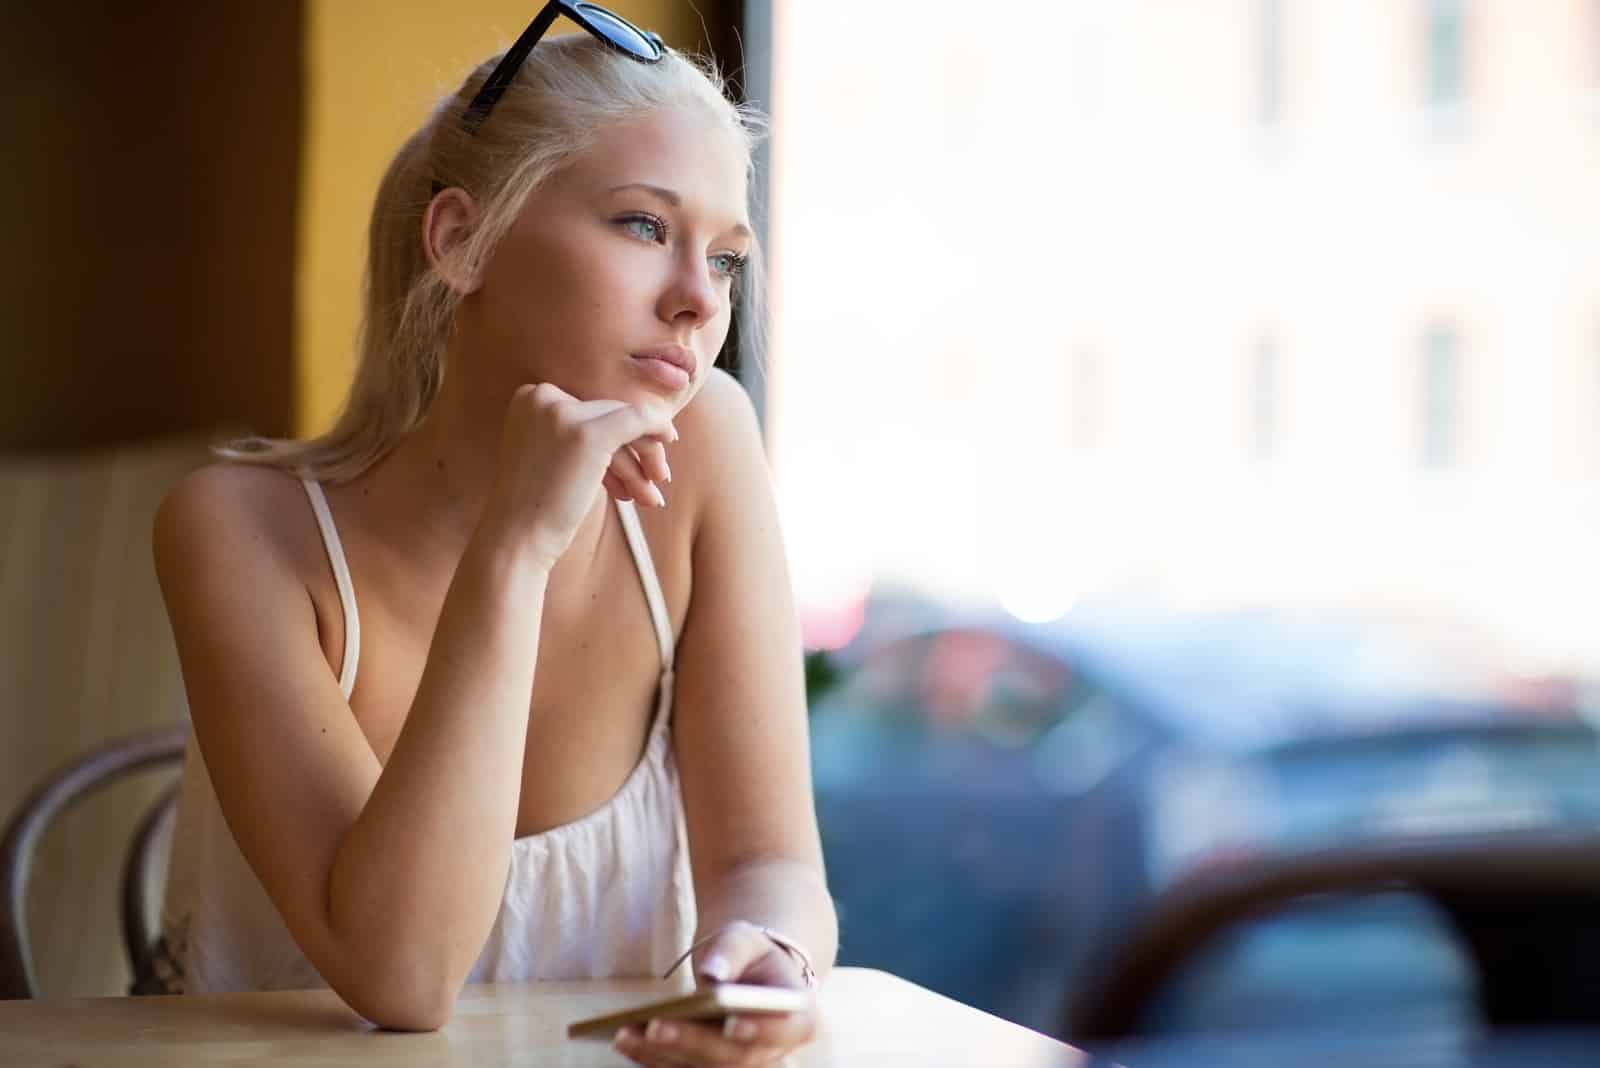 a beautiful woman with blonde hair tied in a ponytail sits thoughtfully at the table